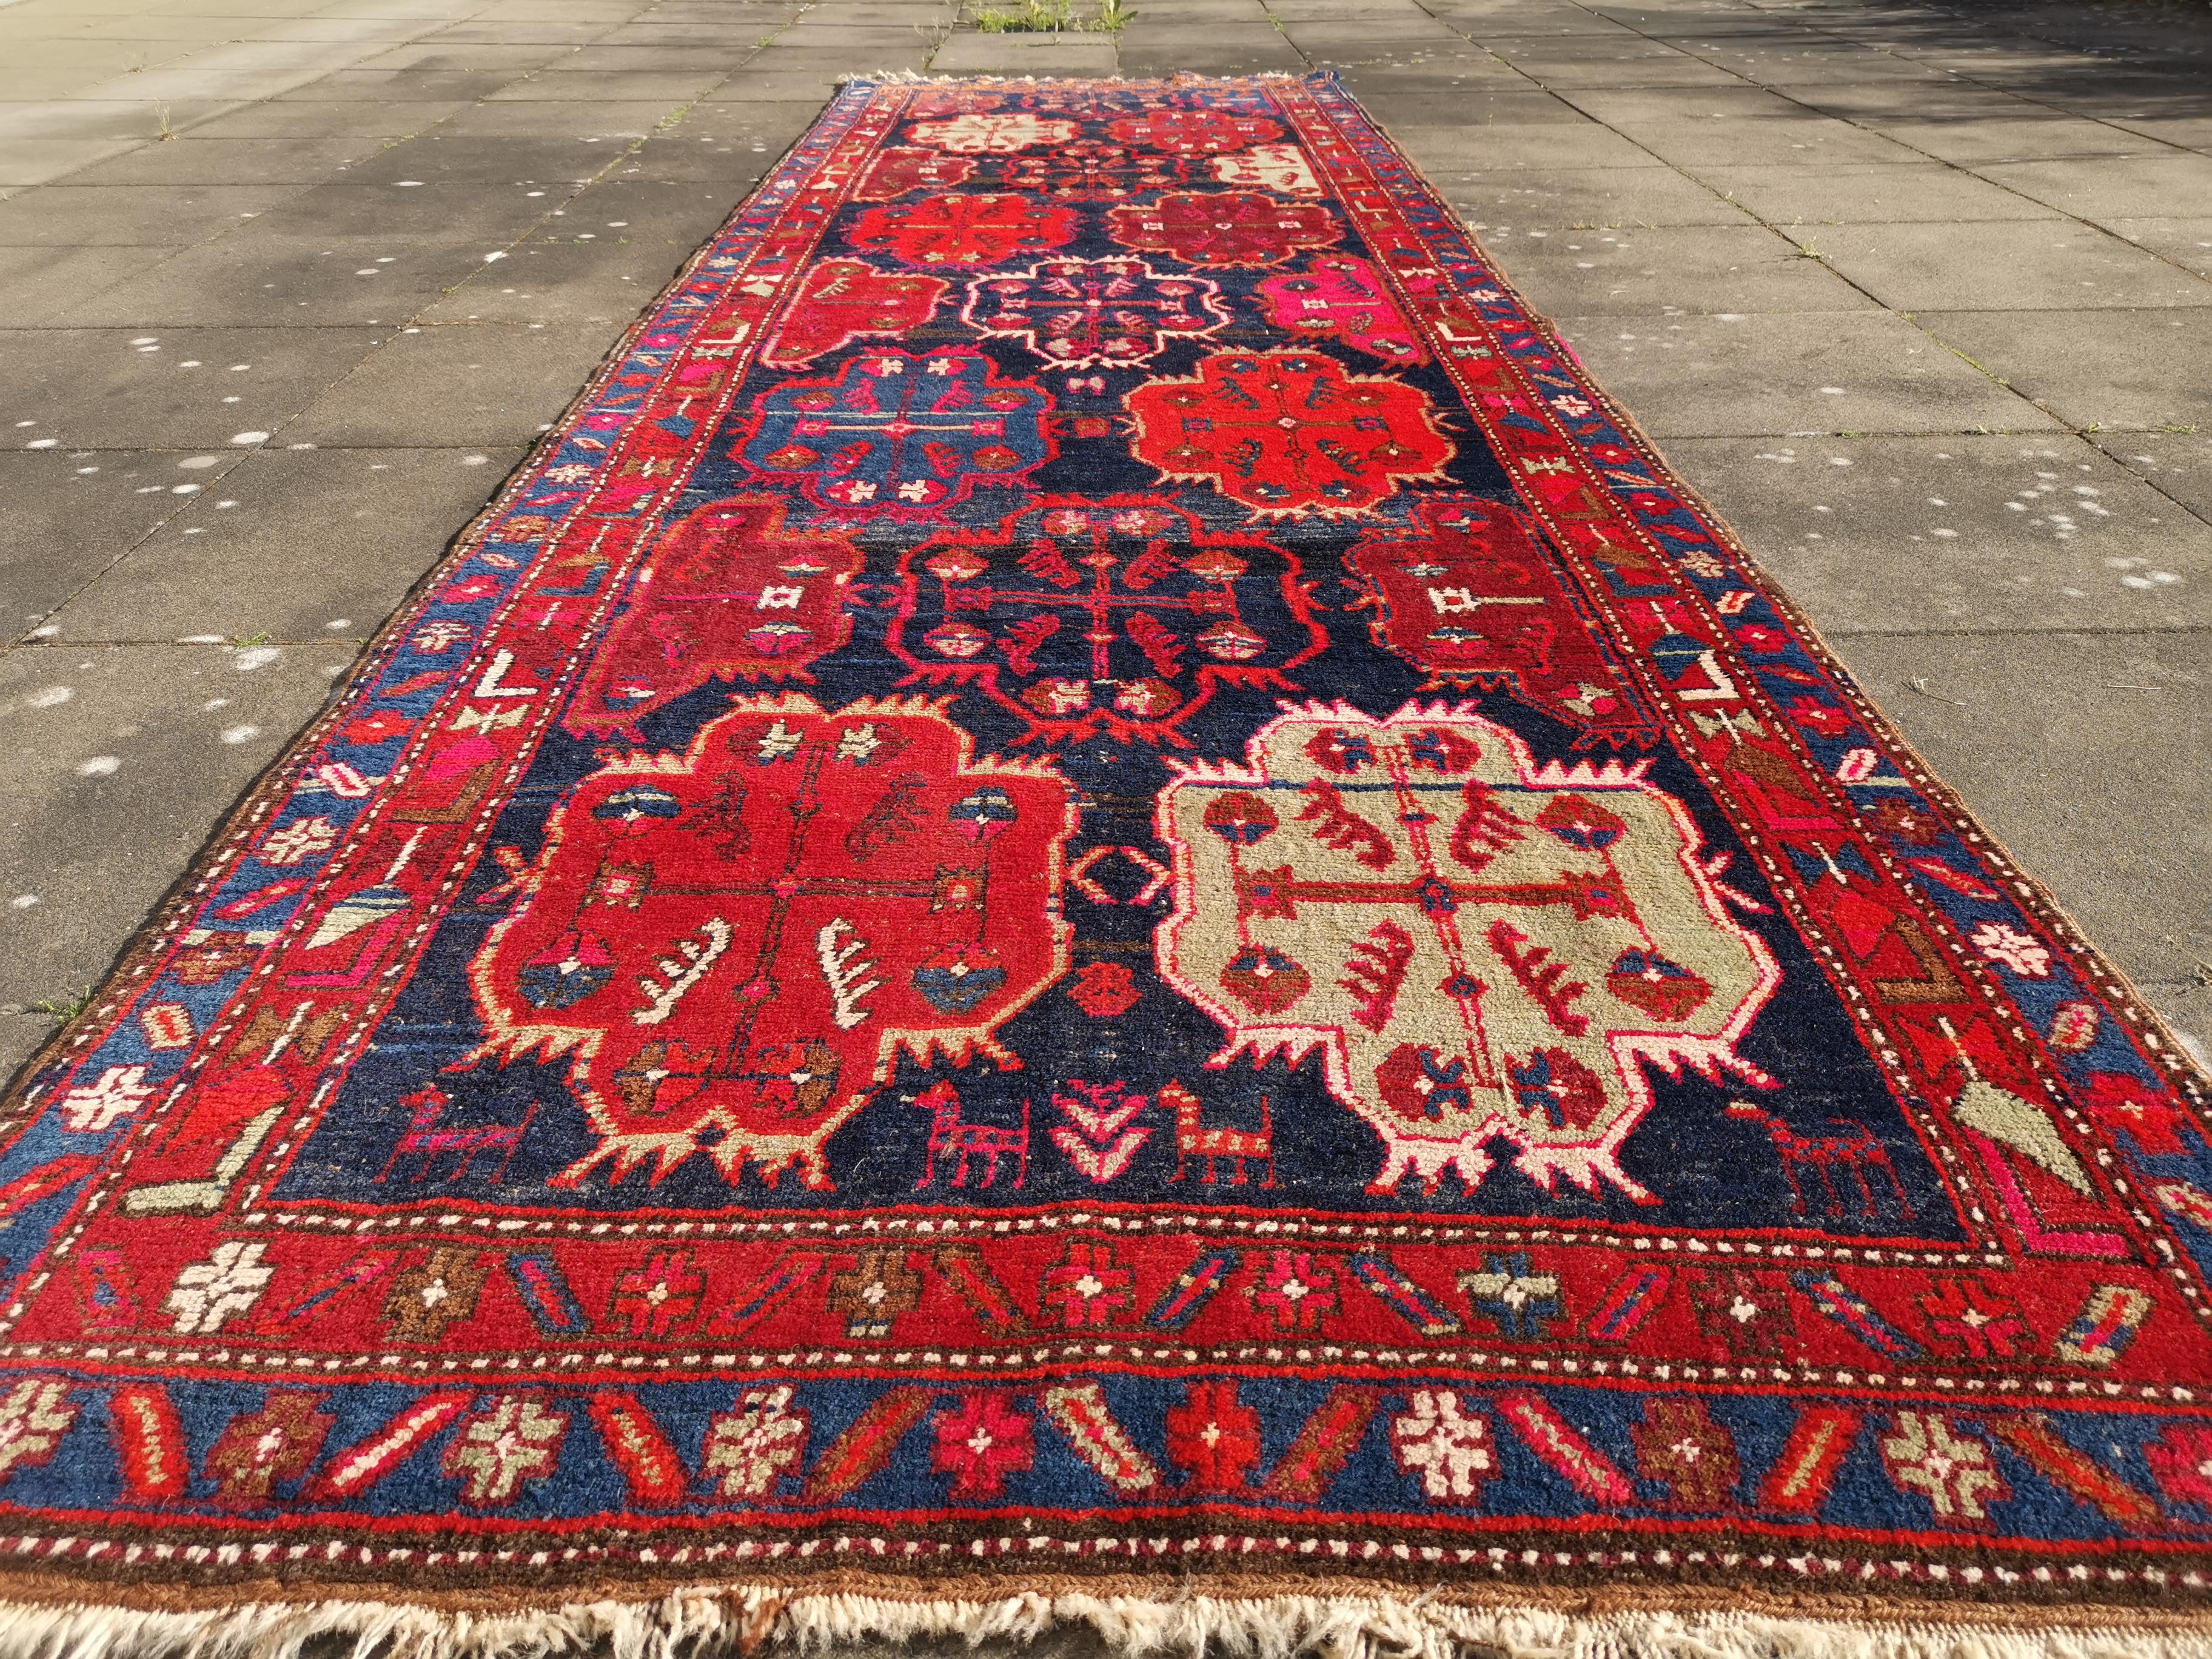 Karabagh semi antique Caucasian rug.

A beautiful antique rug from Azerbeijan.
• Beautiful colors, very vibrant
• All handmade
• Pile pure wool
• Traditional design
• Condition: Very good, wool pile on wool warp and weft. Worn to